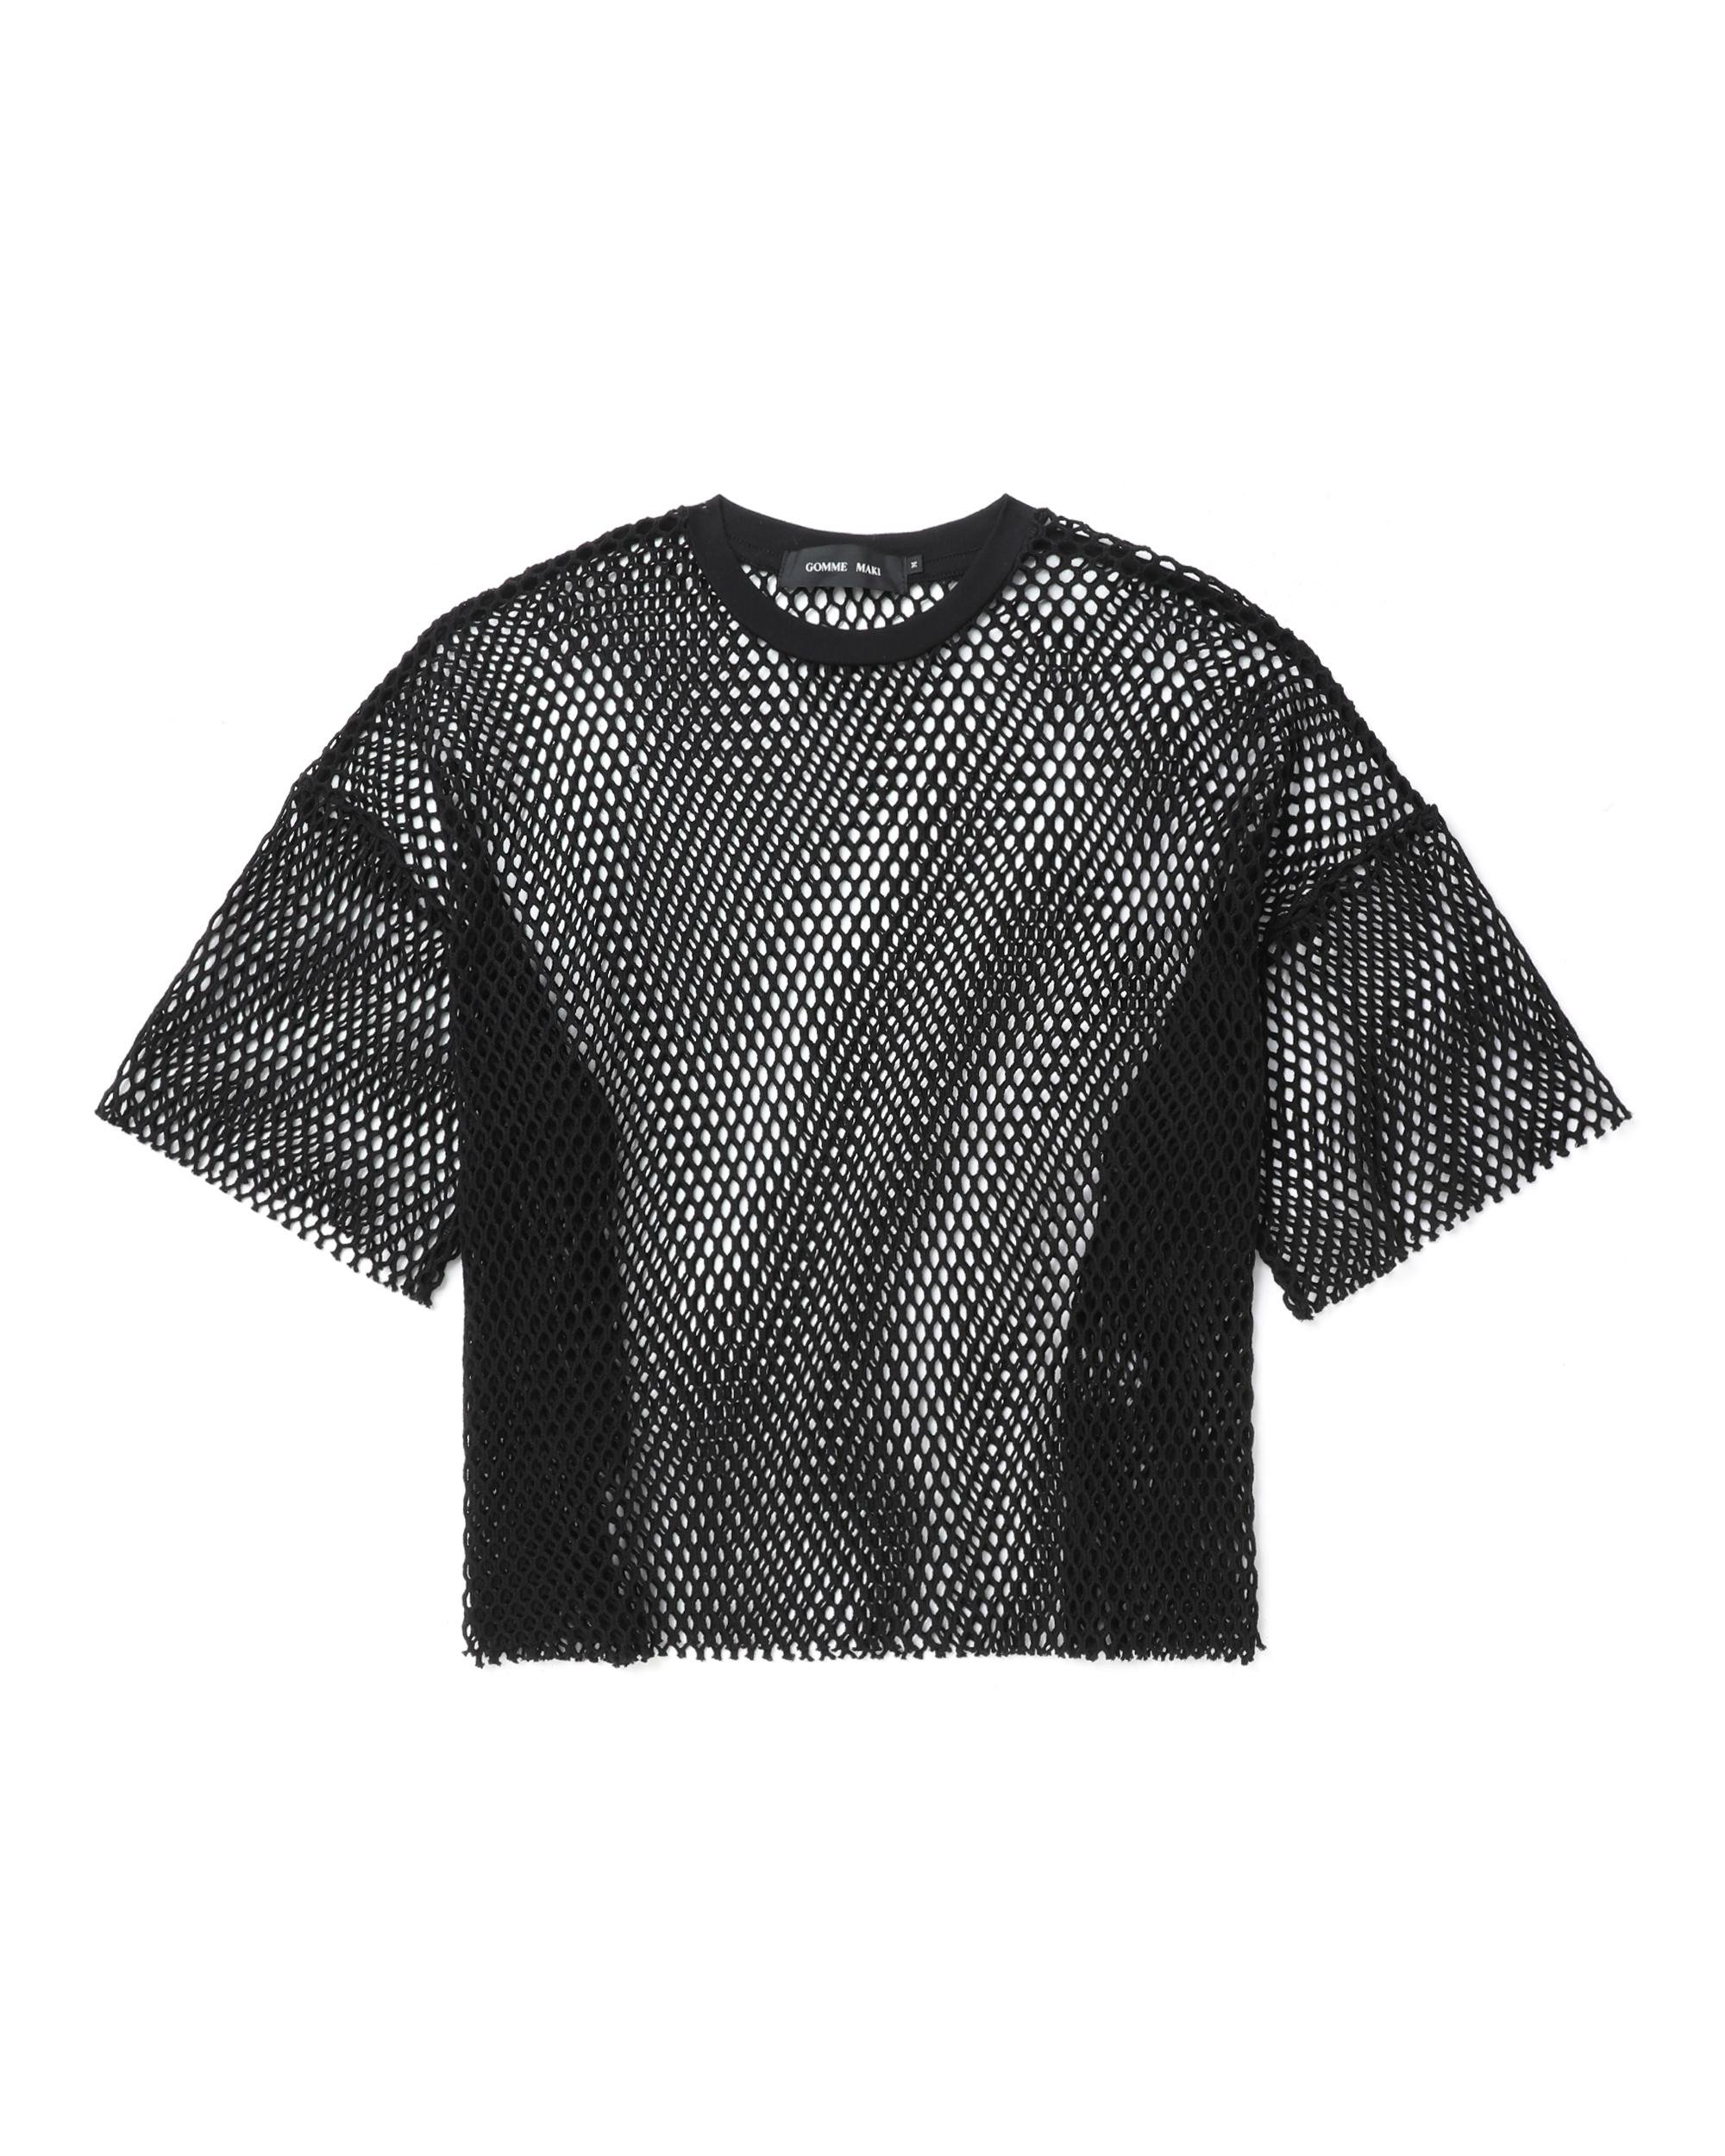 Mesh top by GOMME